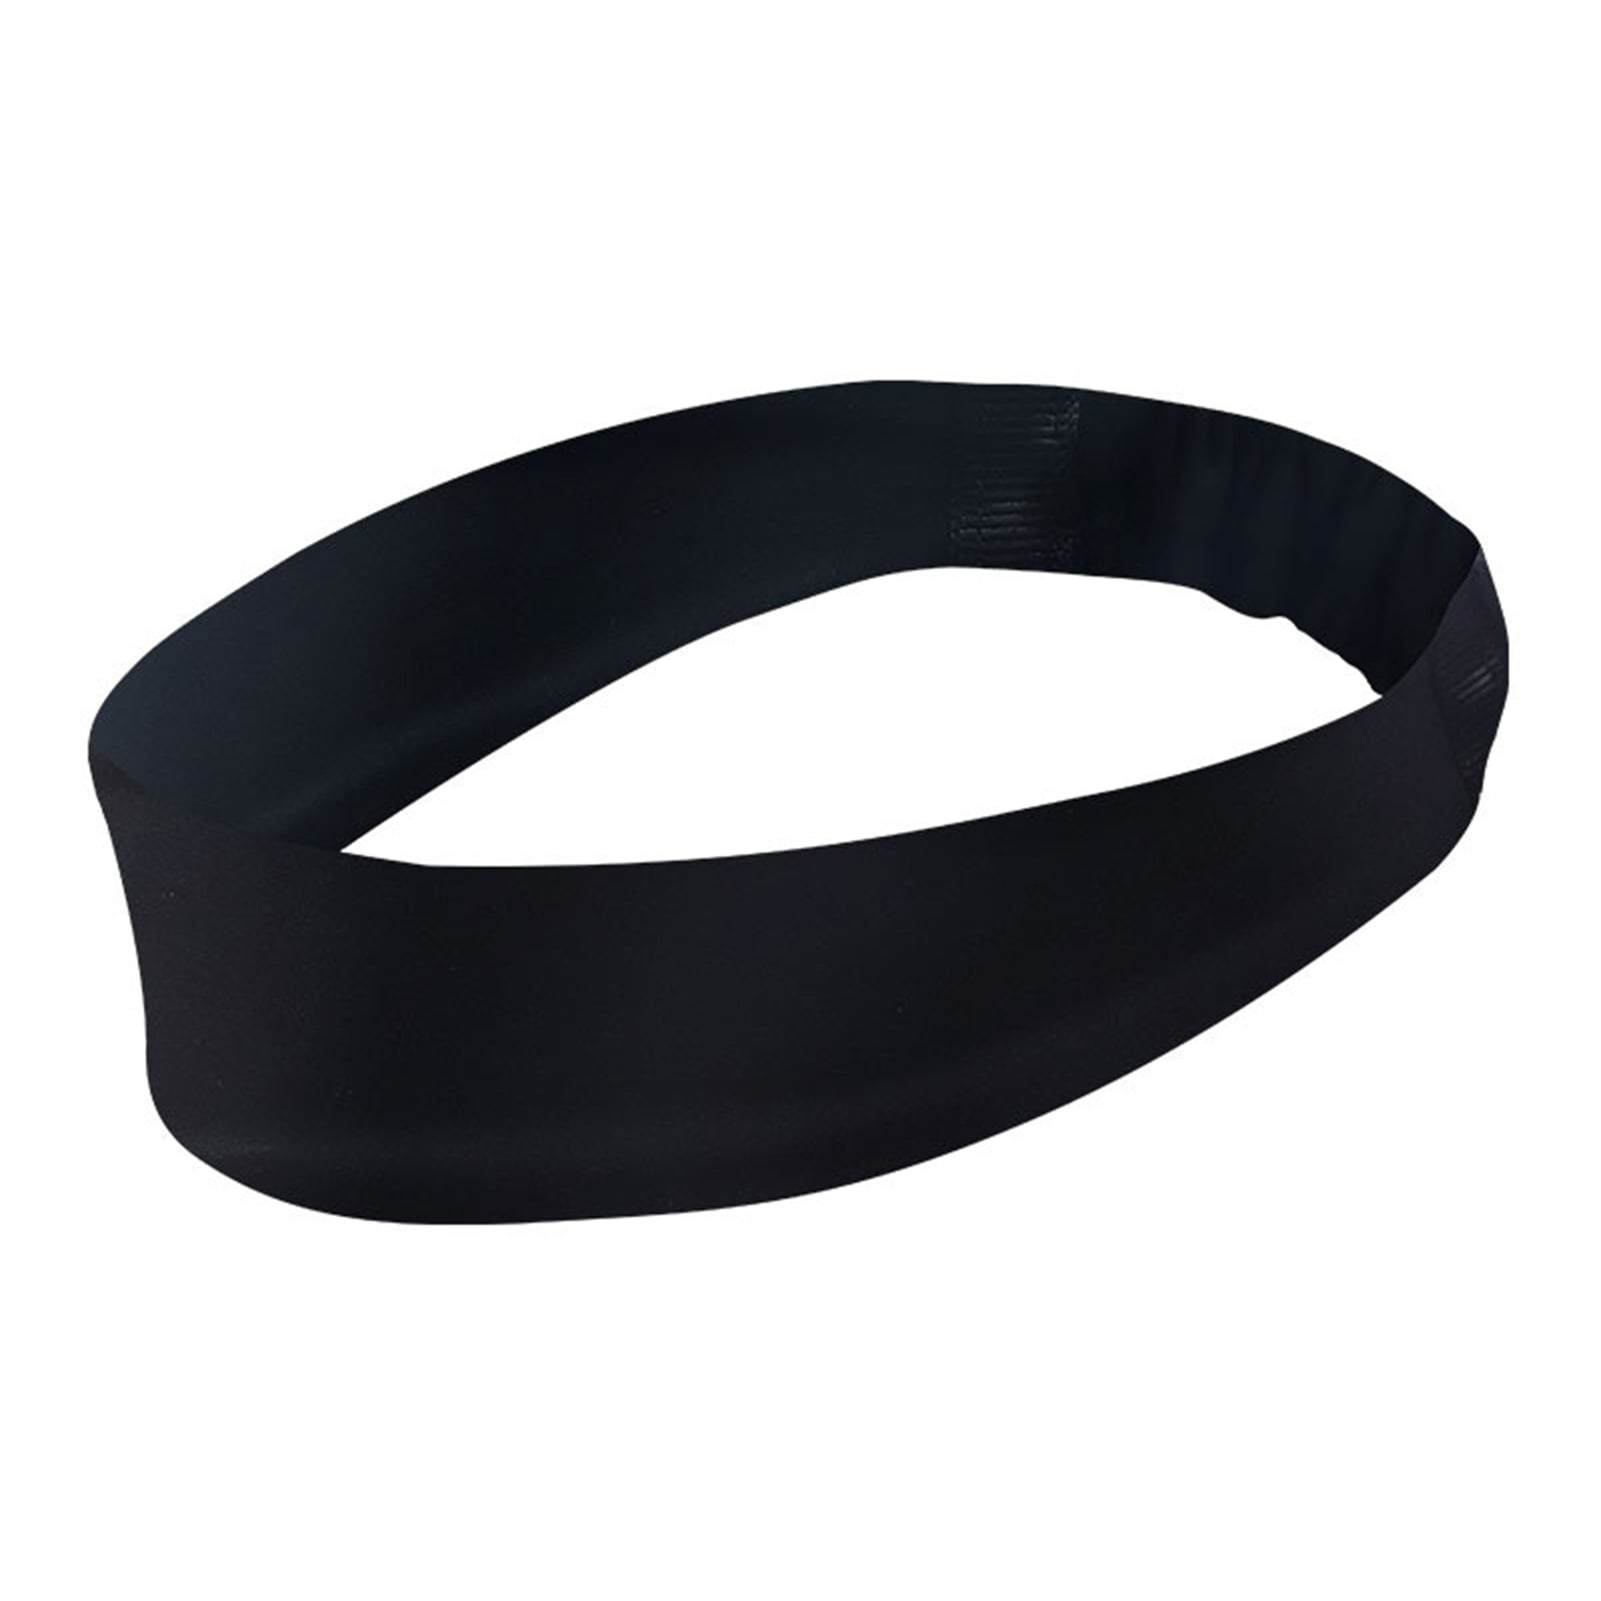 White Set of Unisex Sports Sweatband Head and Wrist Bands Gym Cycling Tennis